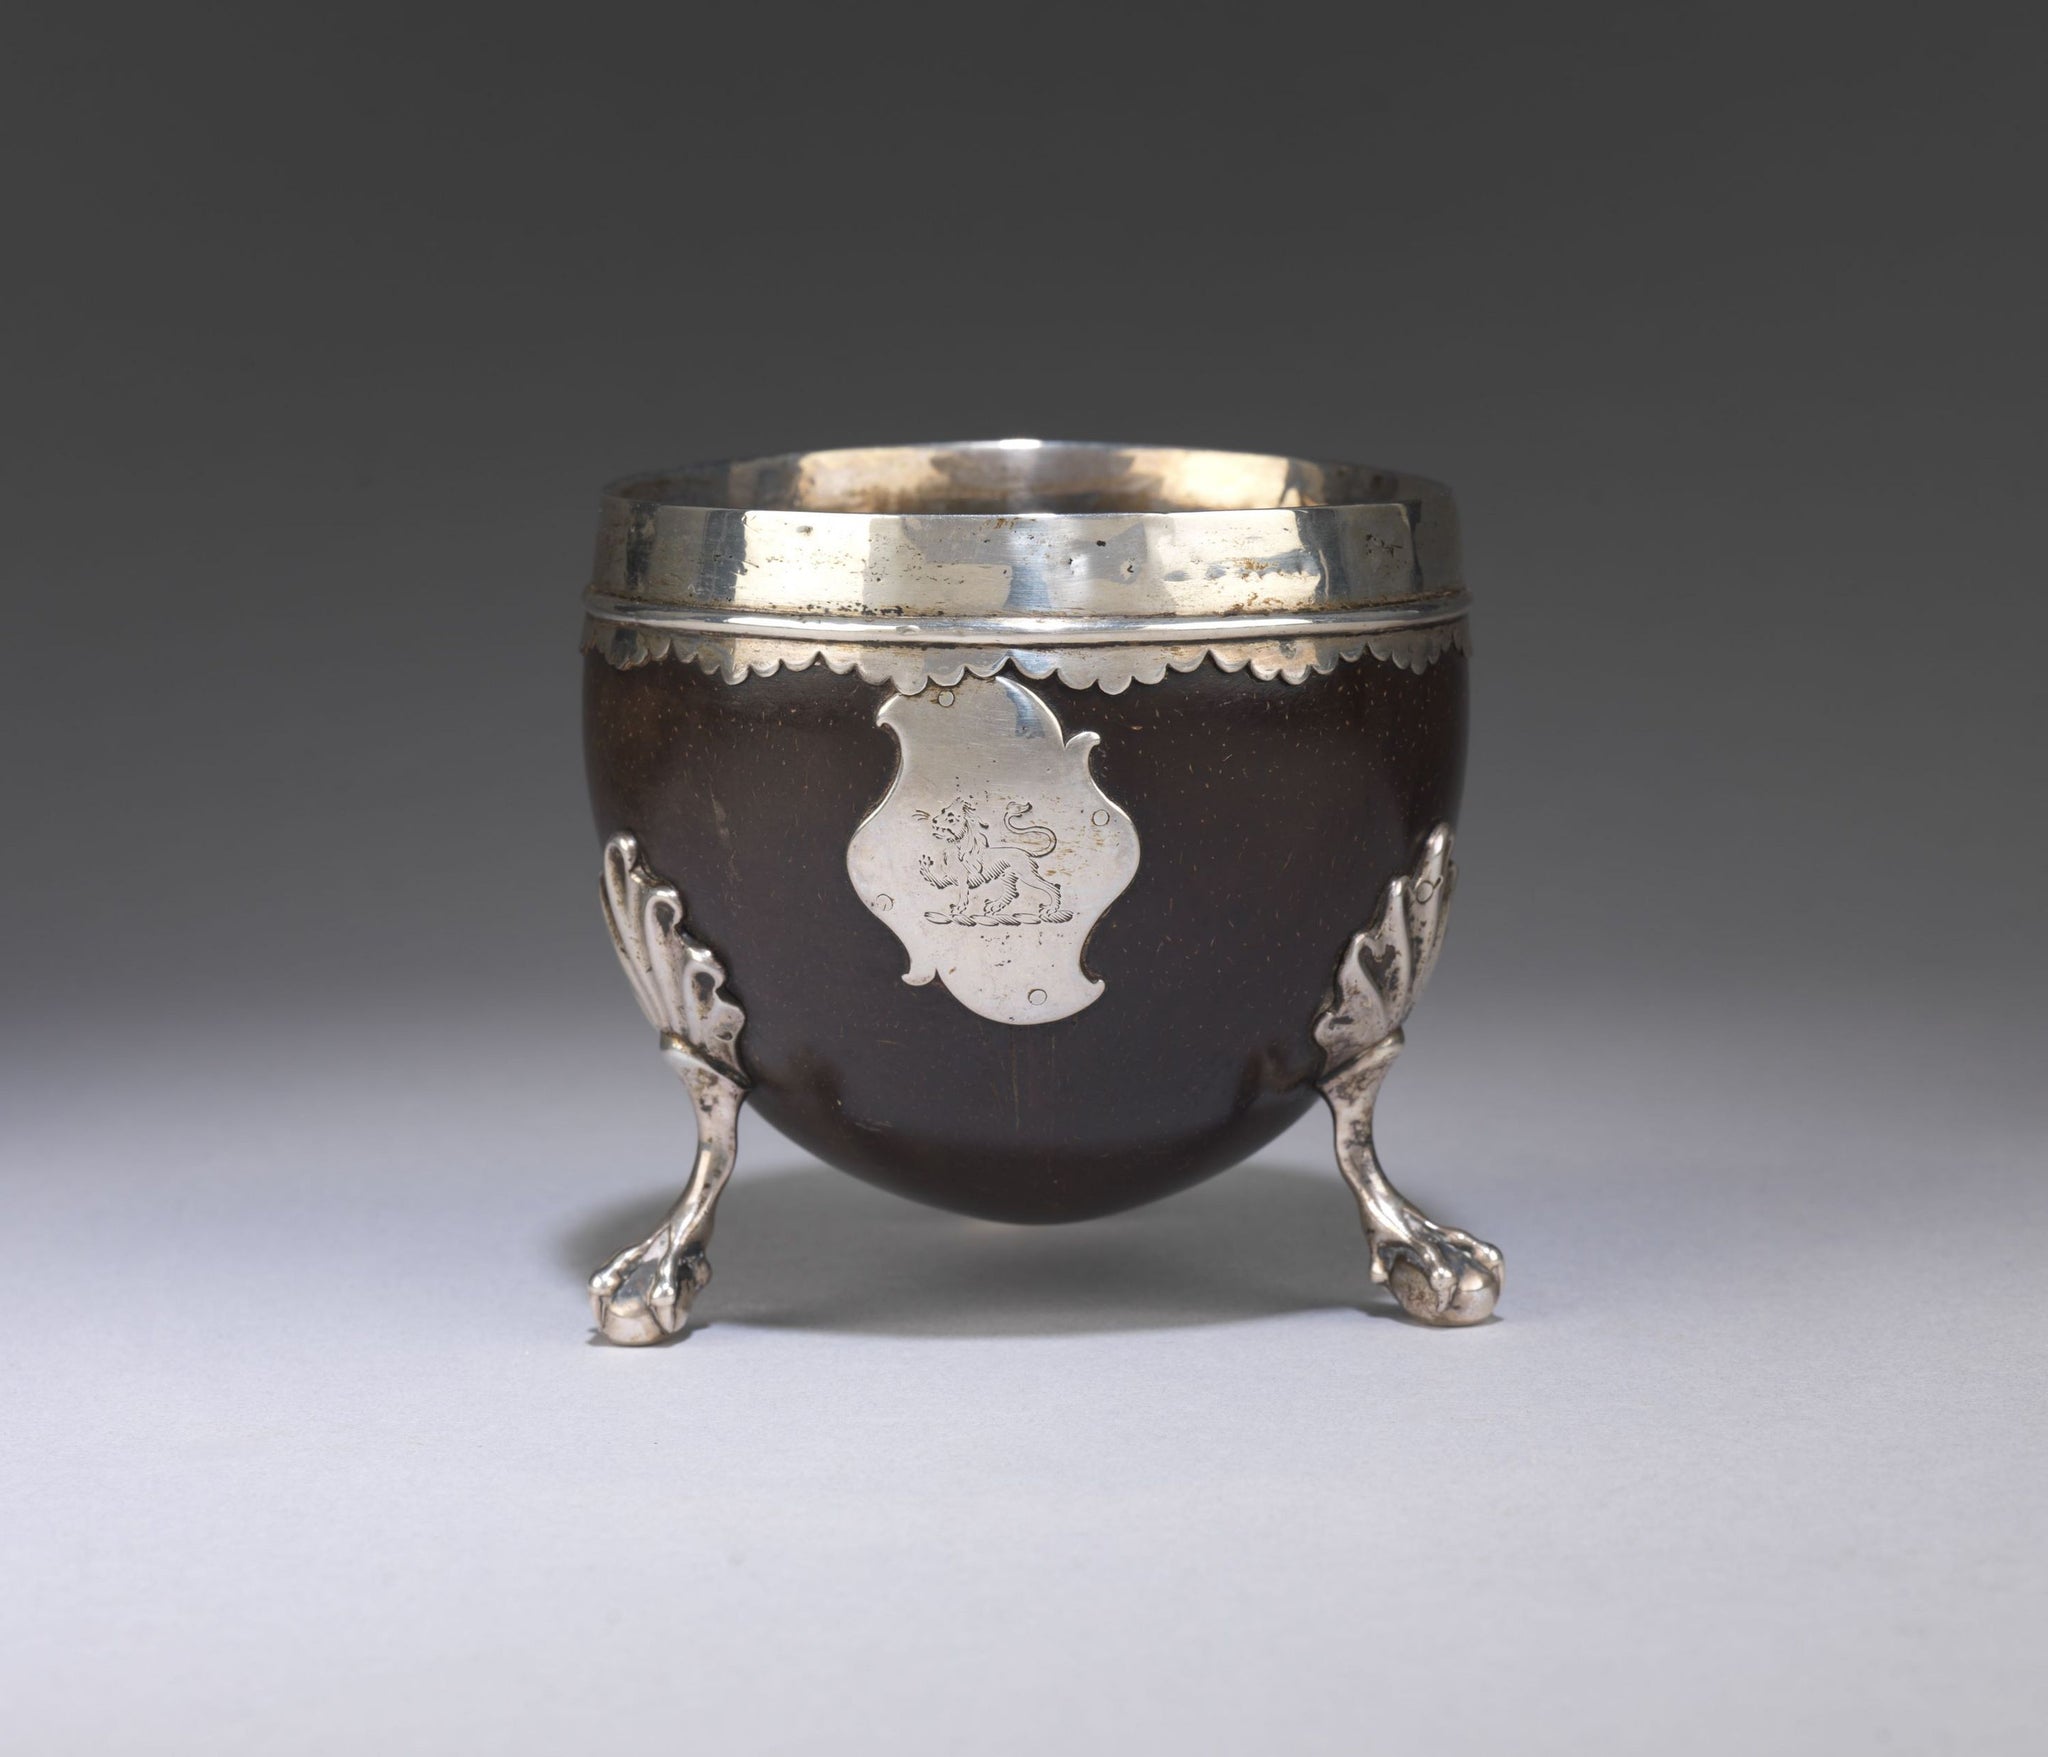  Silver Mounted Coconut Vessel with Armorial Cartouche